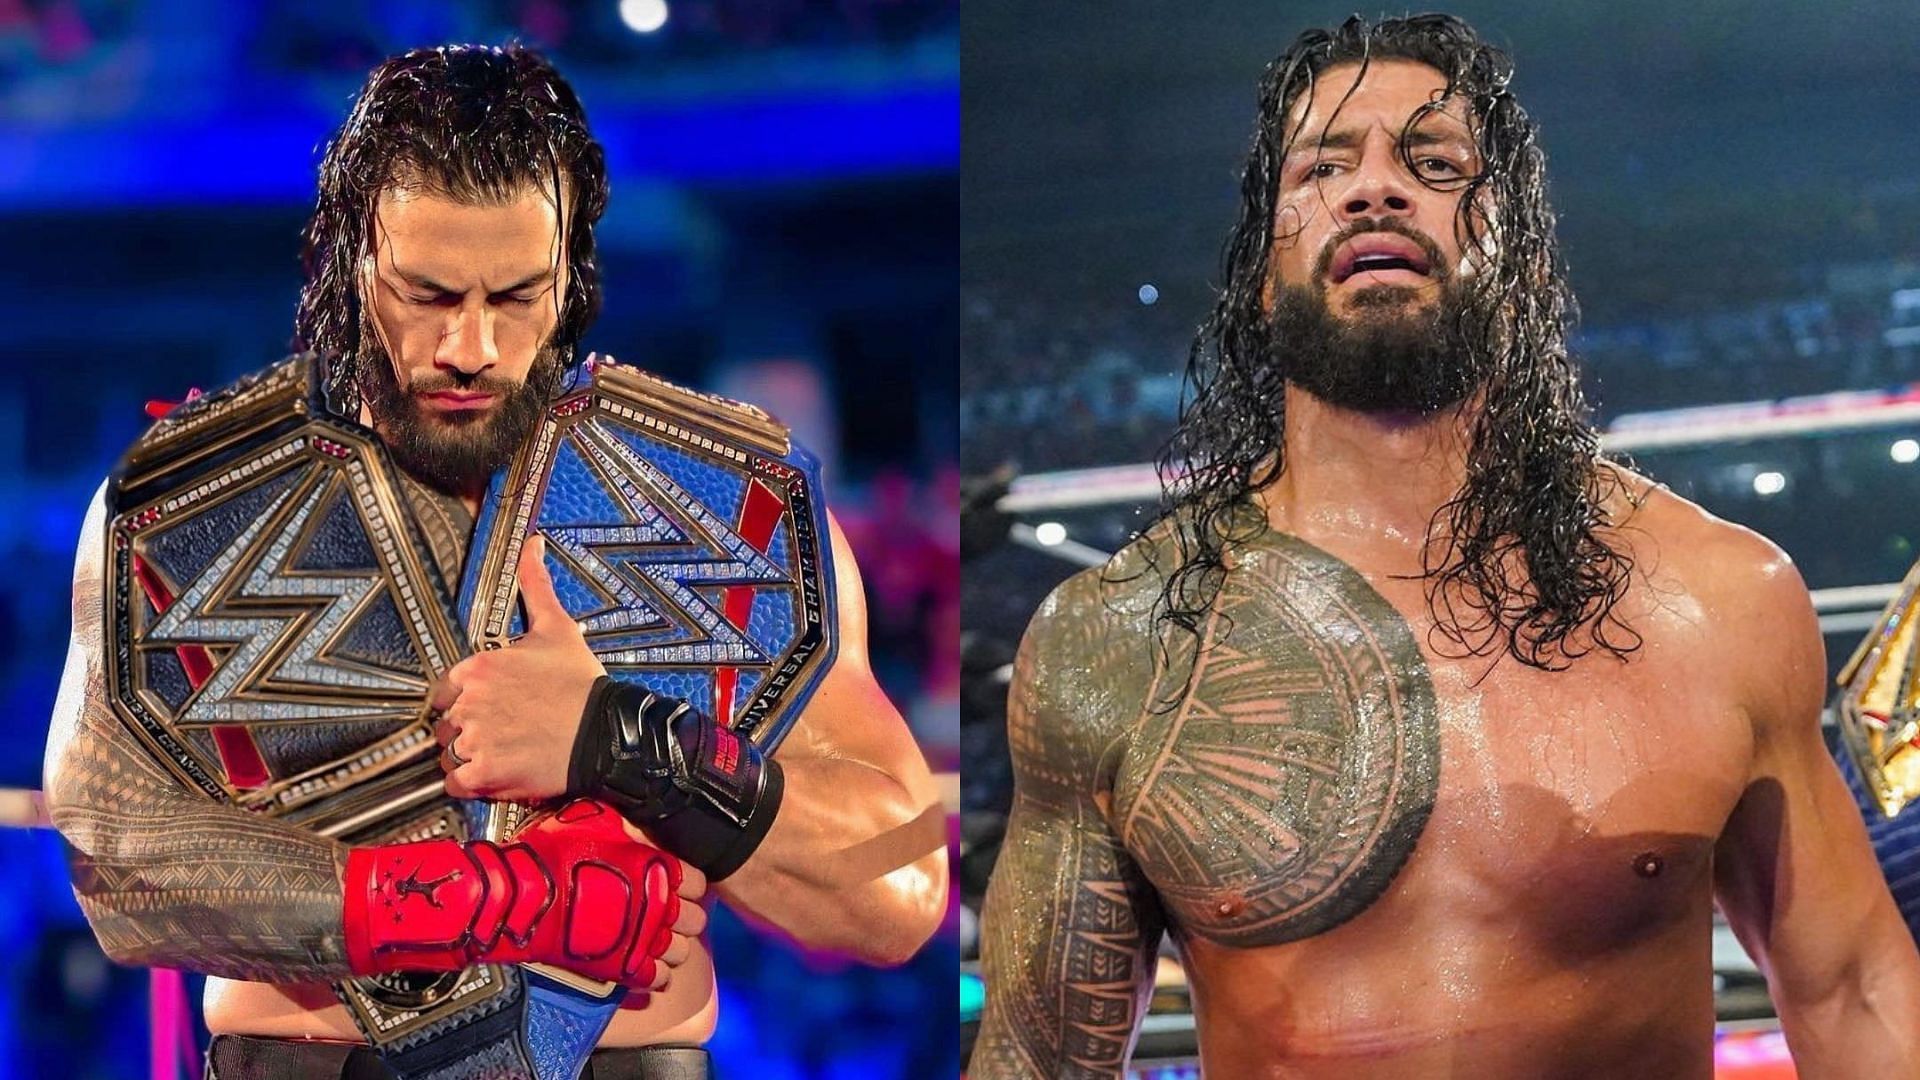 Reigns will be in action at the Royal Rumble.